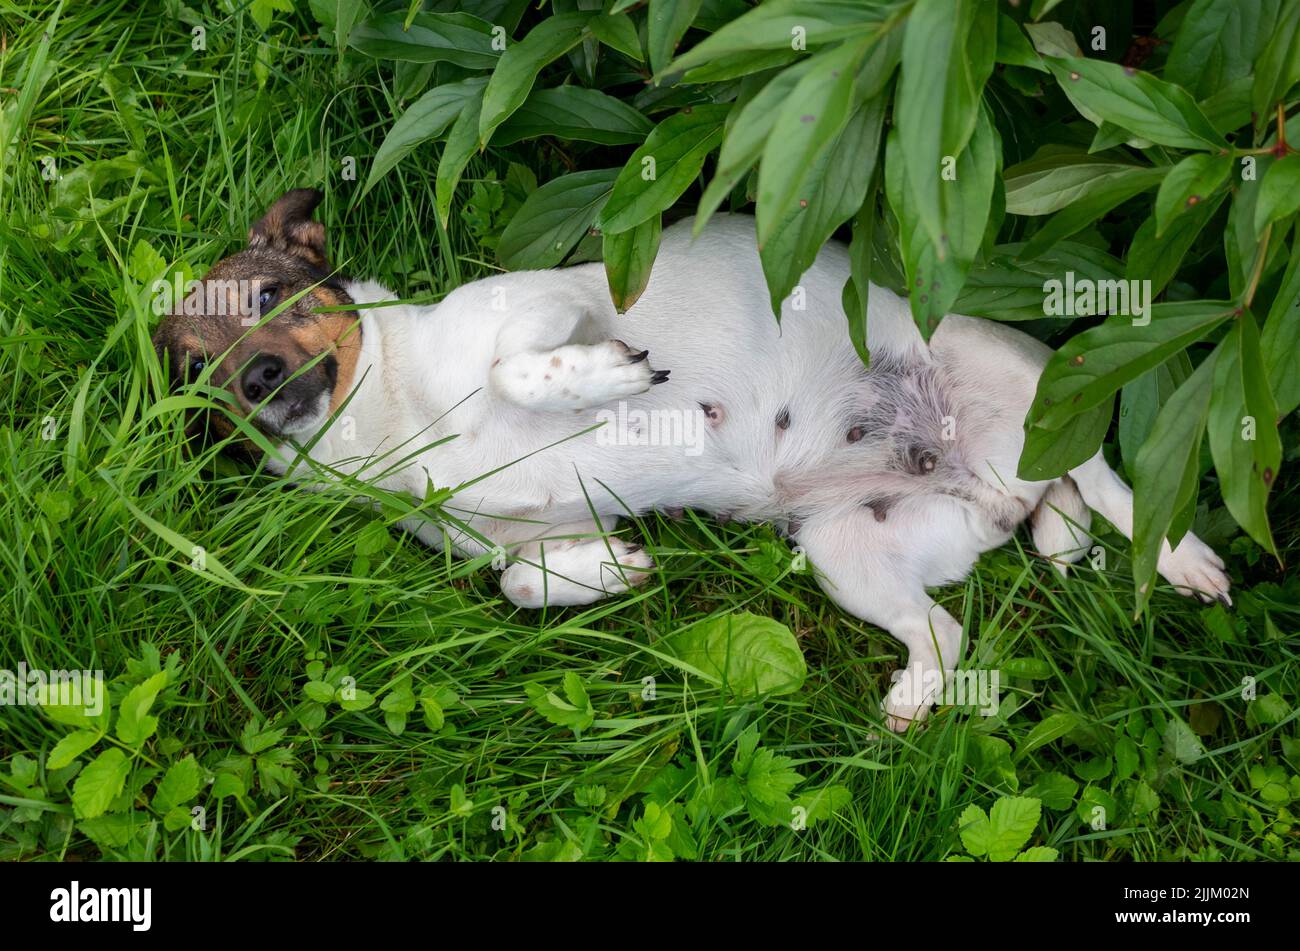 Jack Russell Terrier basks in the green grass. The dog lies upside down Stock Photo